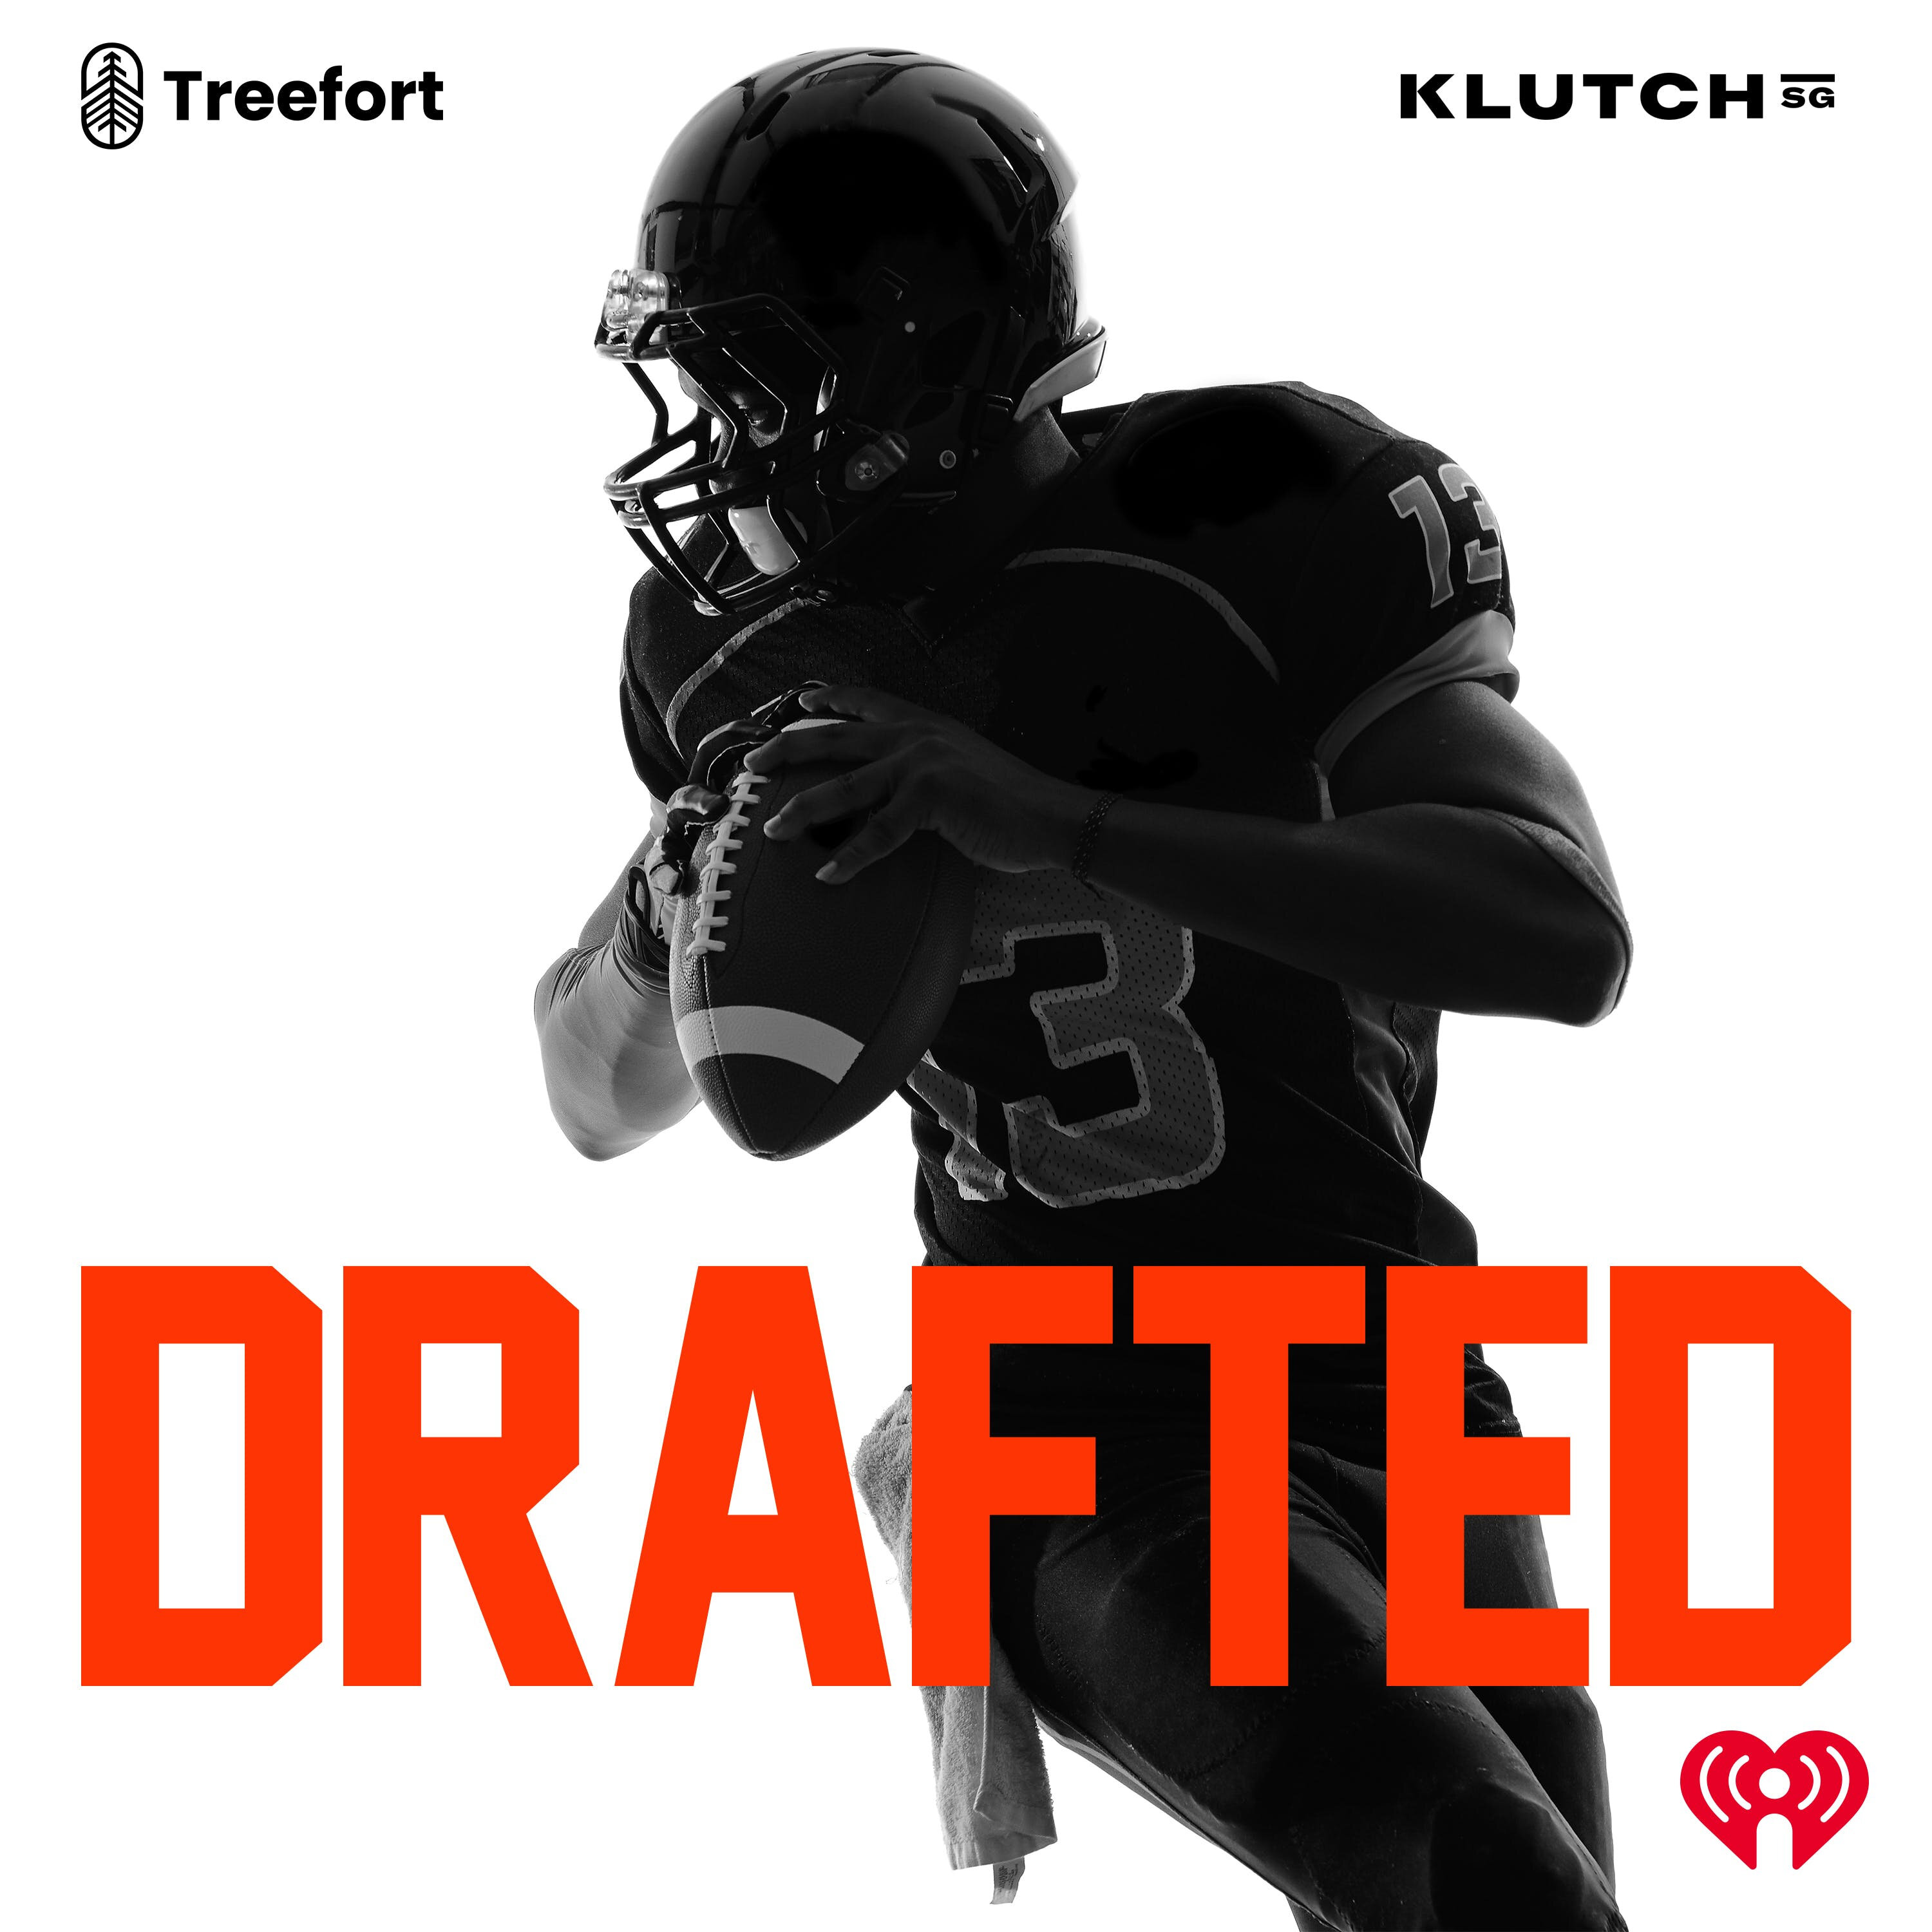 Drafted